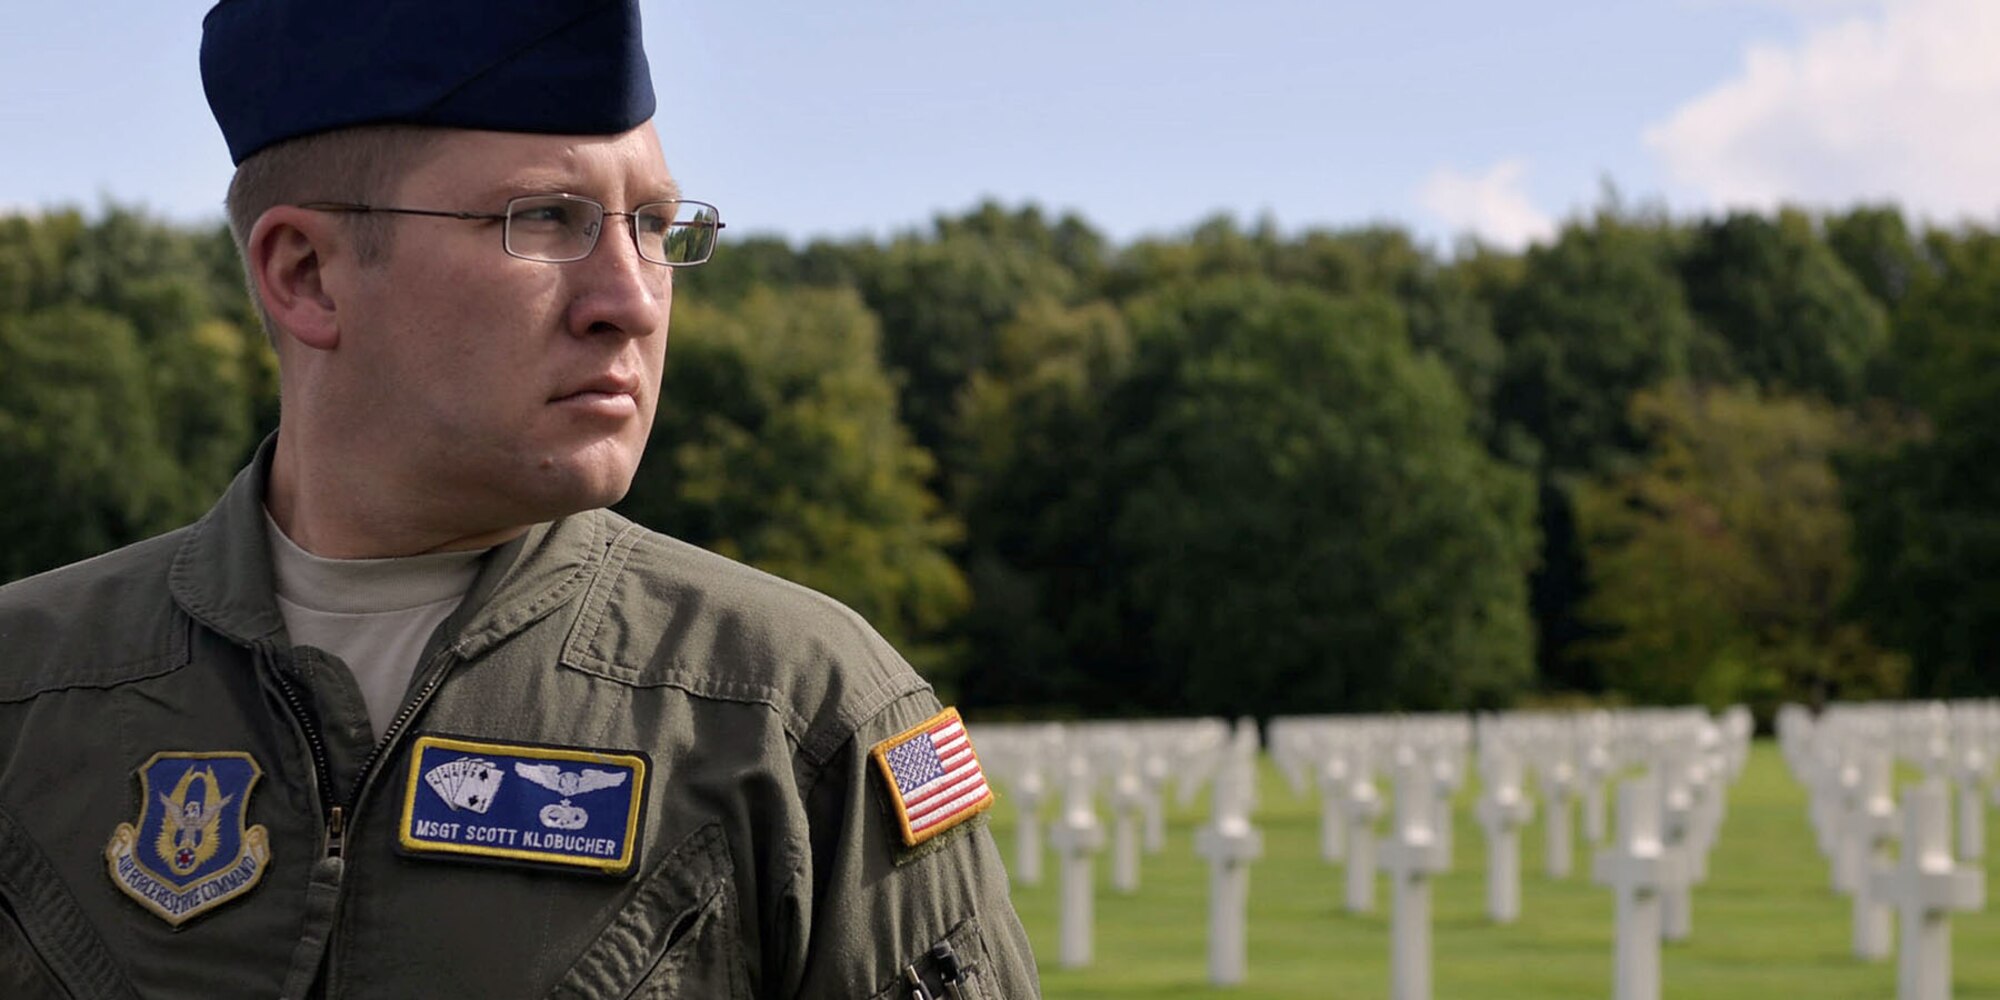 U.S. Air Force Reserve Master Sgt. Scott Klobucher, a loadmaster assigned to the 327th Airlift Squadron, 913th Airlift Group, takes a moment to reflect on history during a wreath laying ceremony at Ardennes American Military Cemetery in Neupre, Belgium, Sept. 12, 2017. The ceremony honored several squadrons from WWII that have roots back to current units at Little Rock AFB. (U.S. Air Force photo by Airman 1st Class Codie Collins)